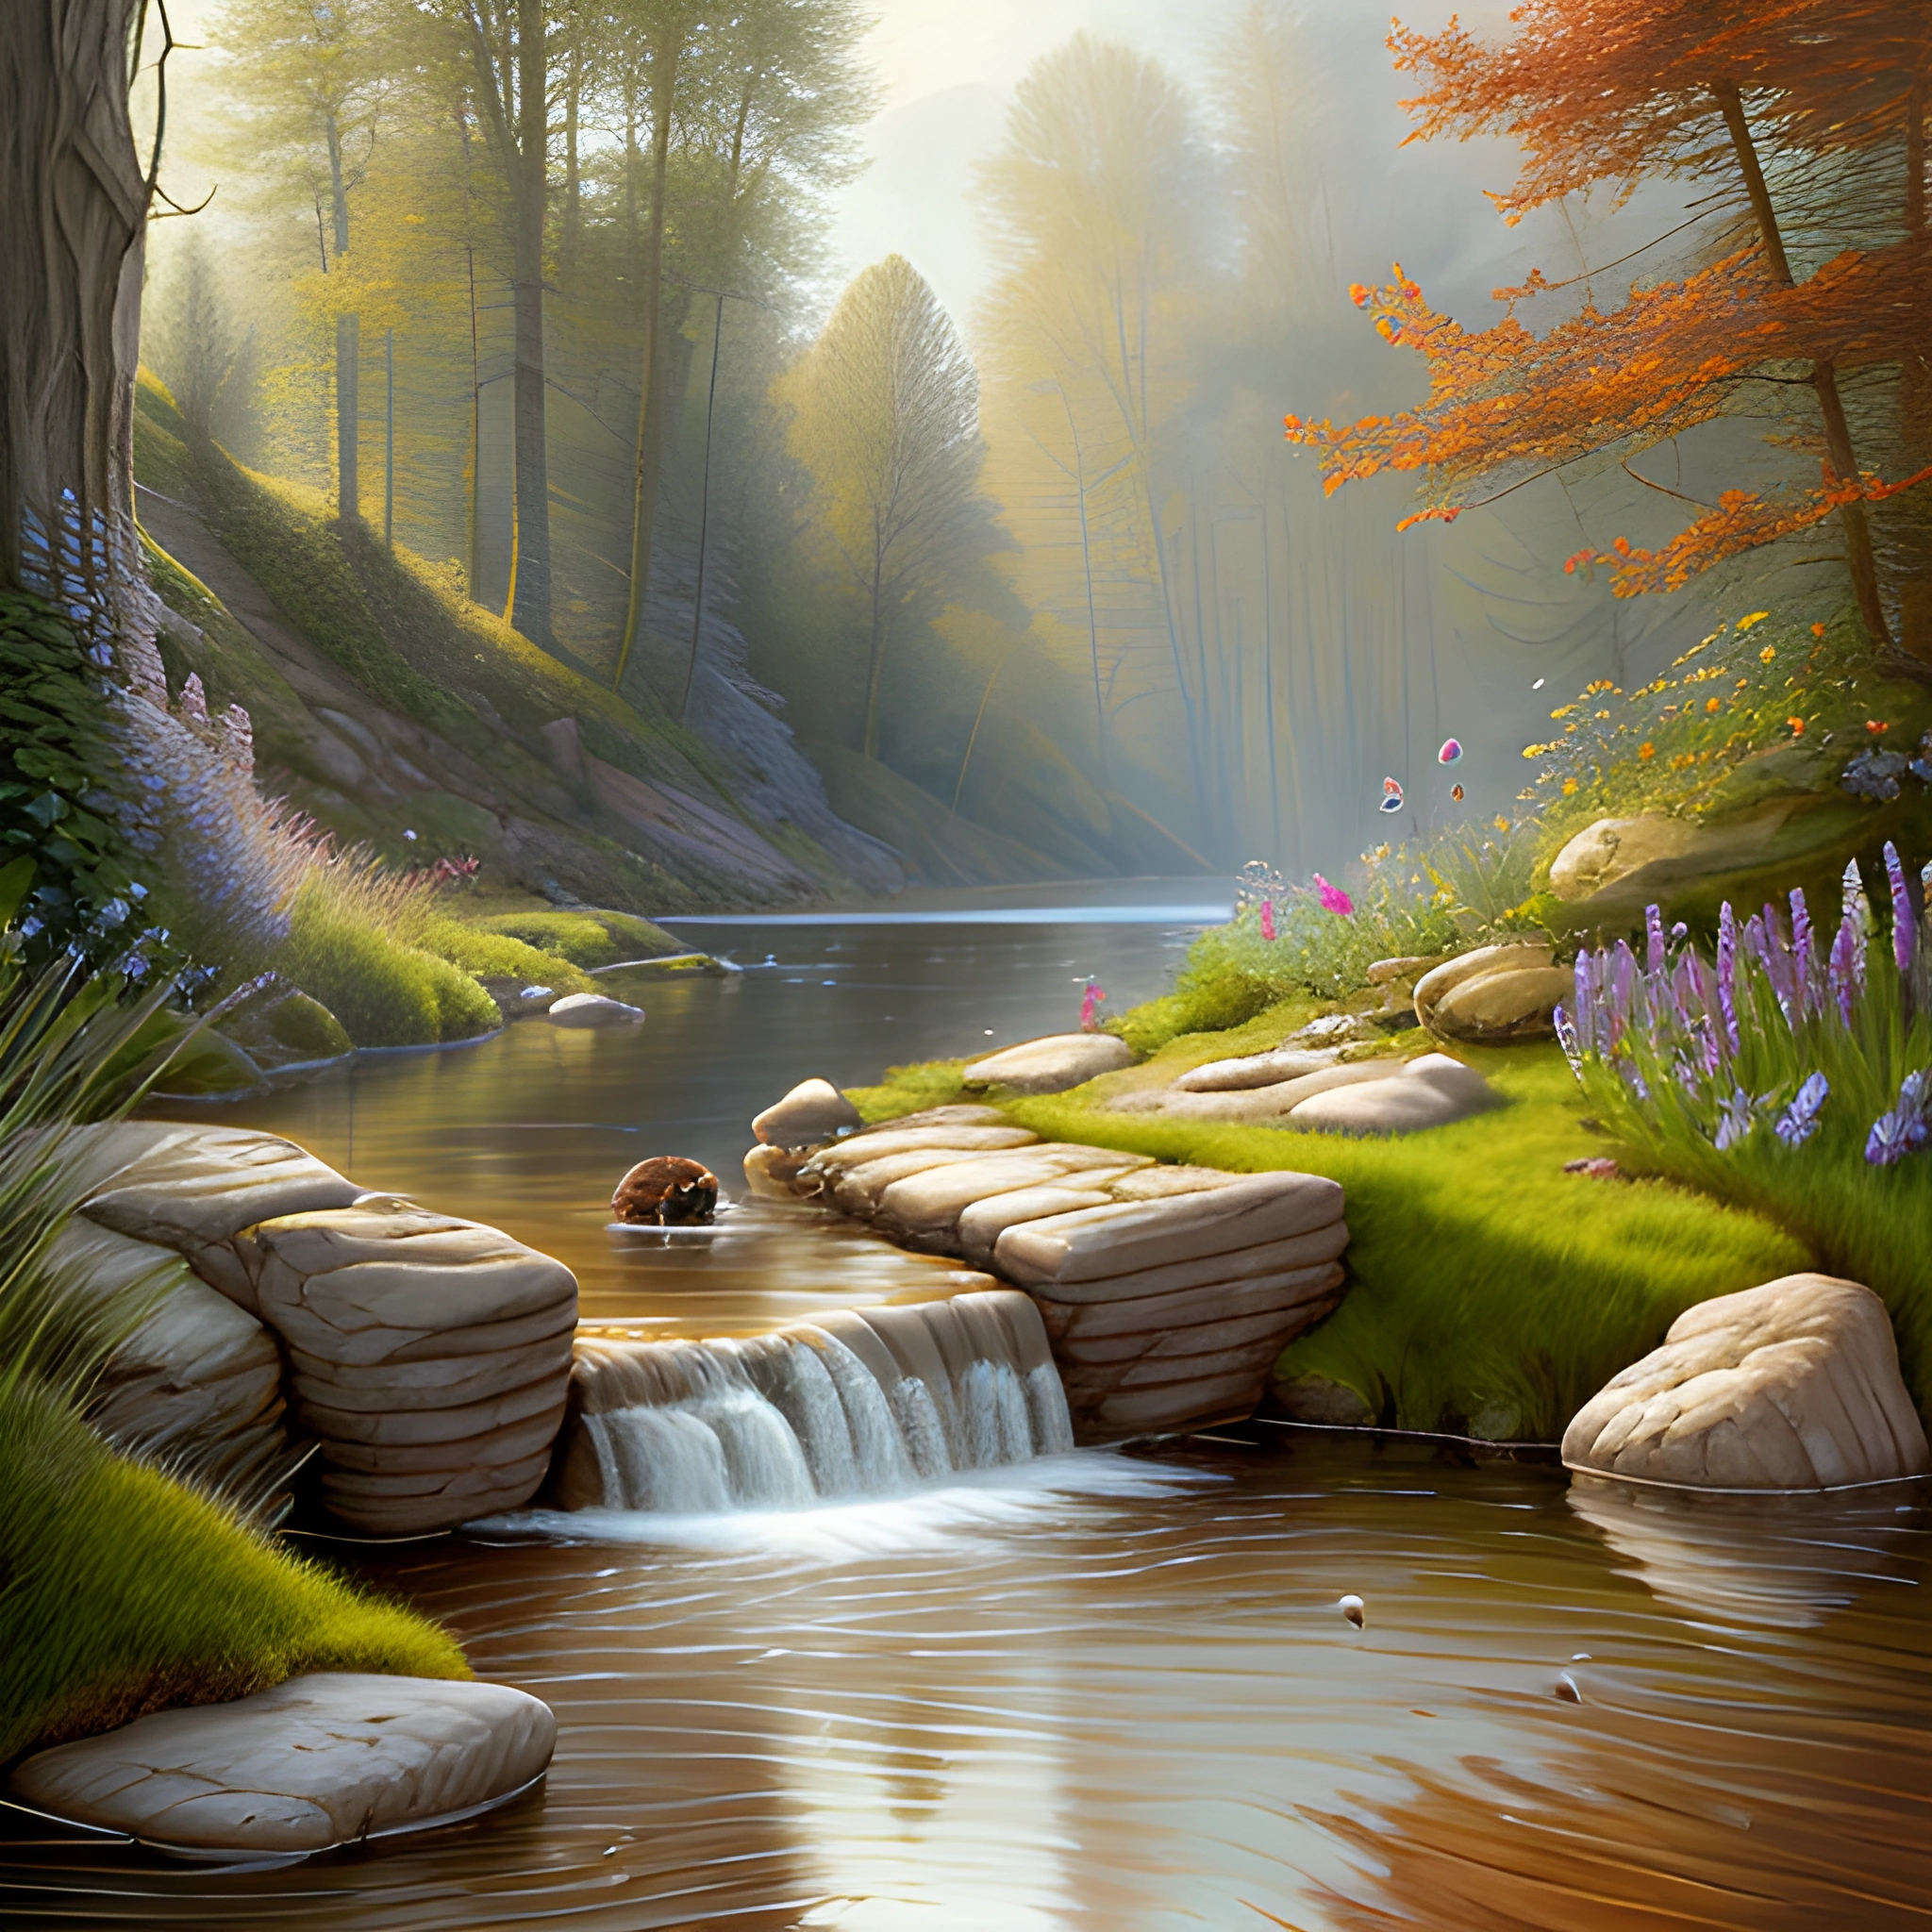 painting of a stream in a forest with a bear and flowers